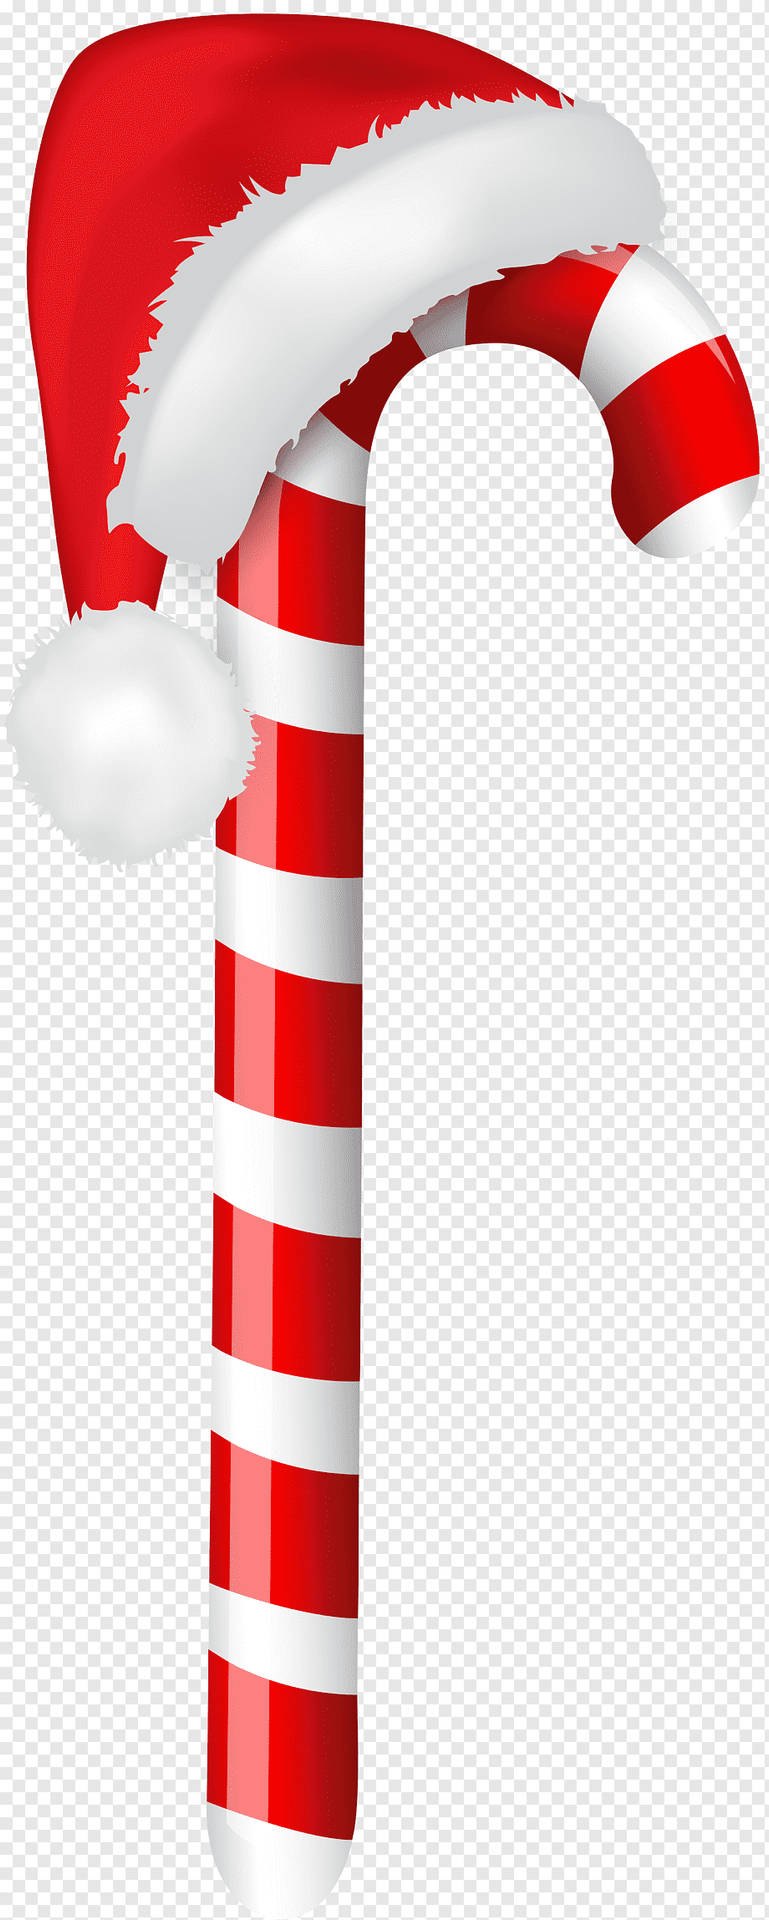 Candy Cane With Christmas Hat Wallpaper